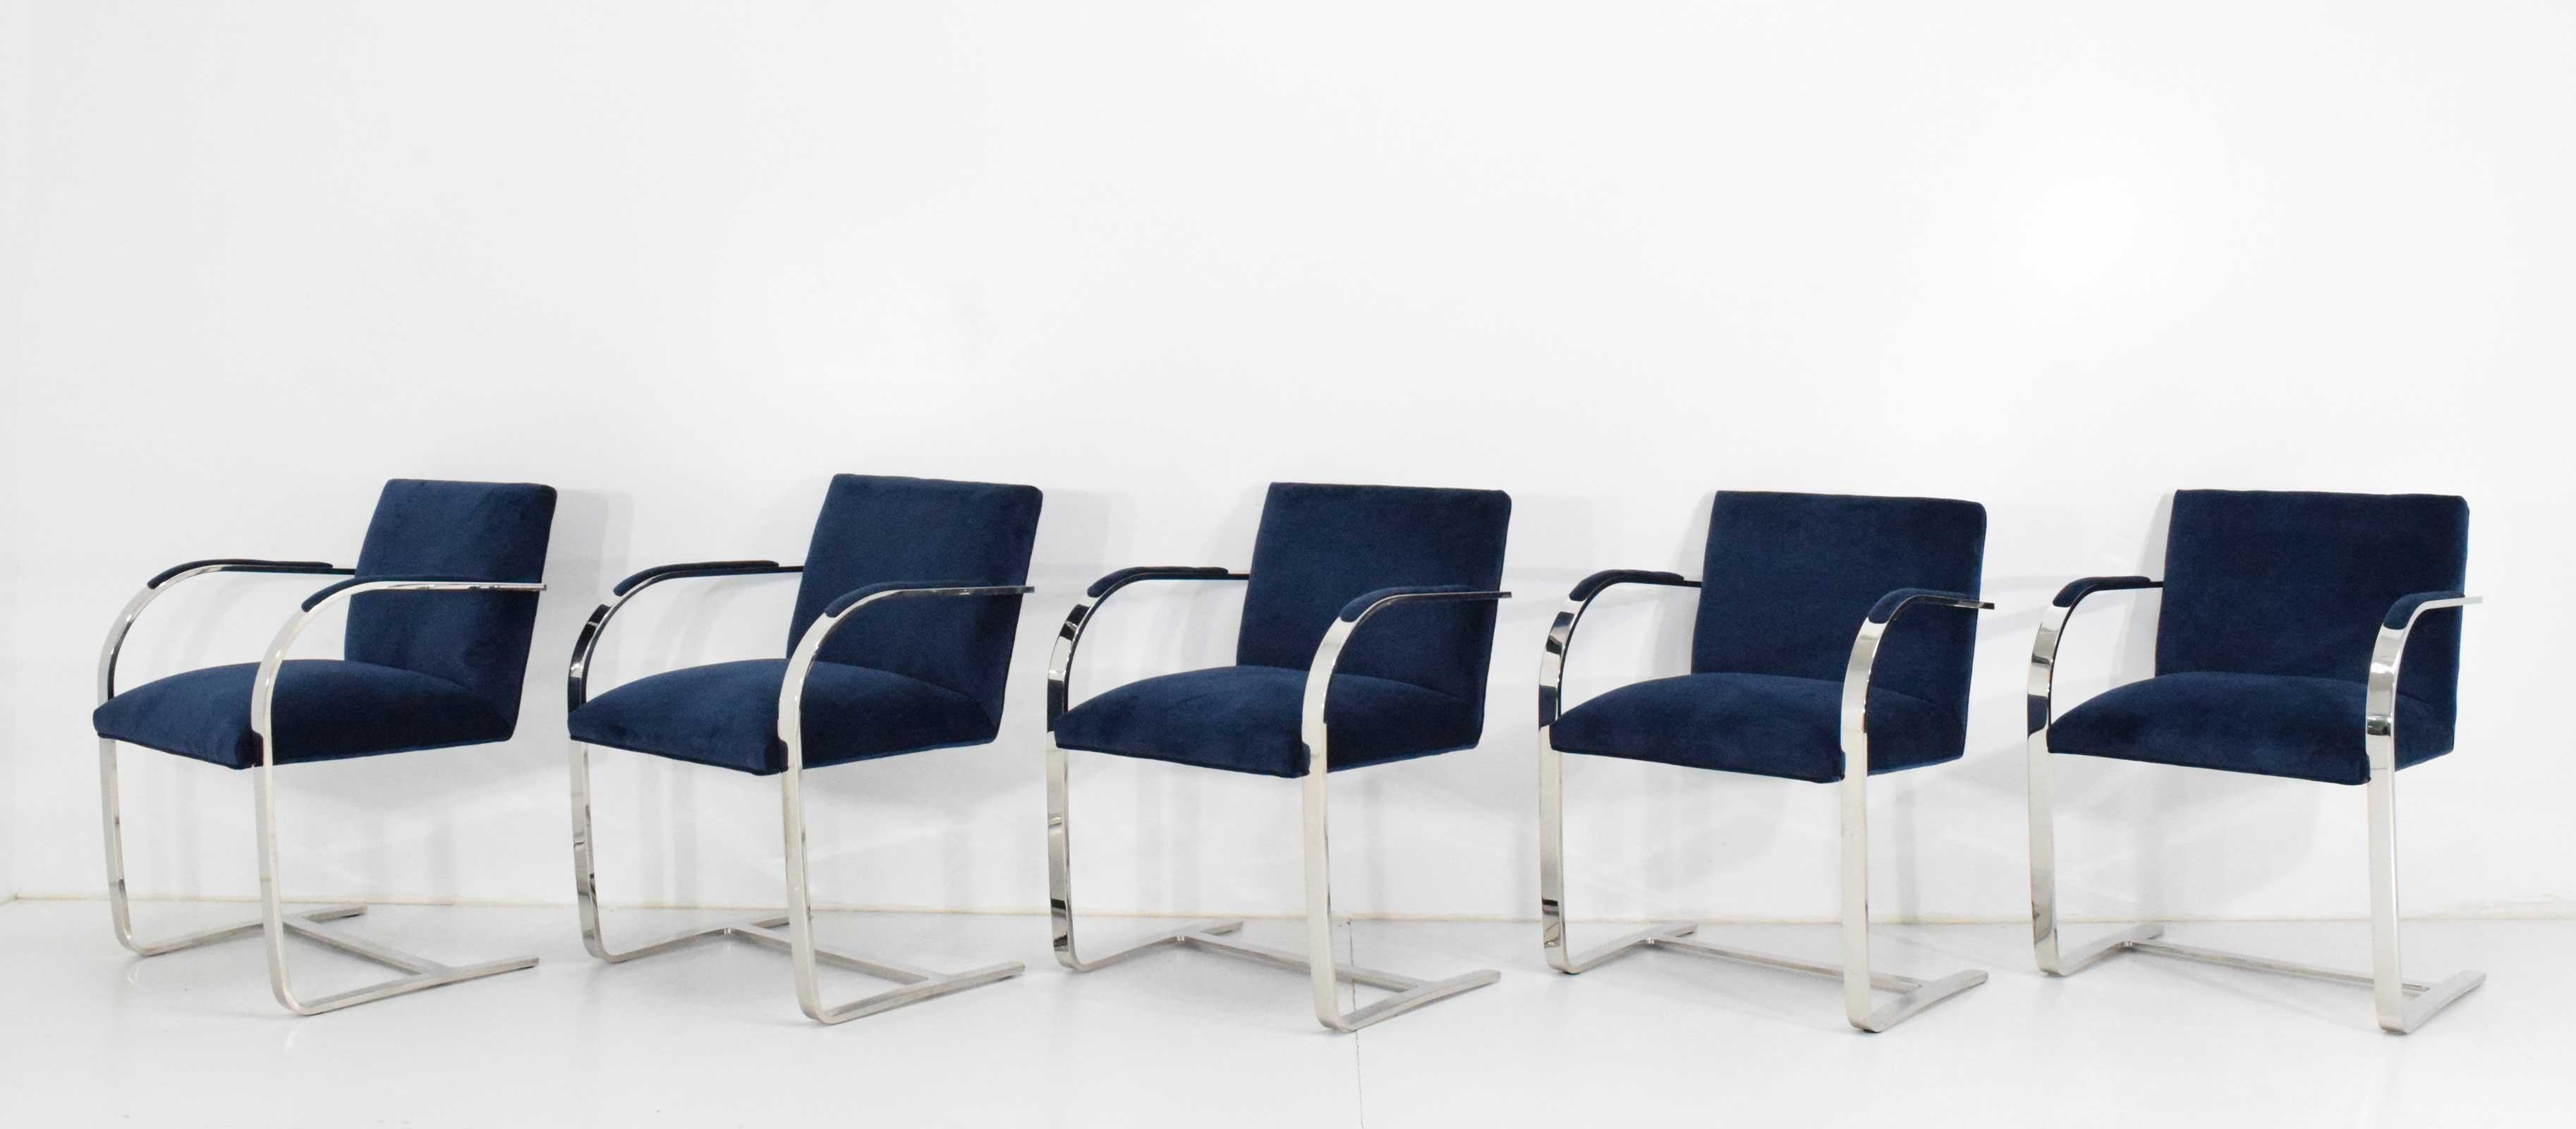 20th Century Set of Ten Stainless Steel Flatbar Brno Chairs by Knoll